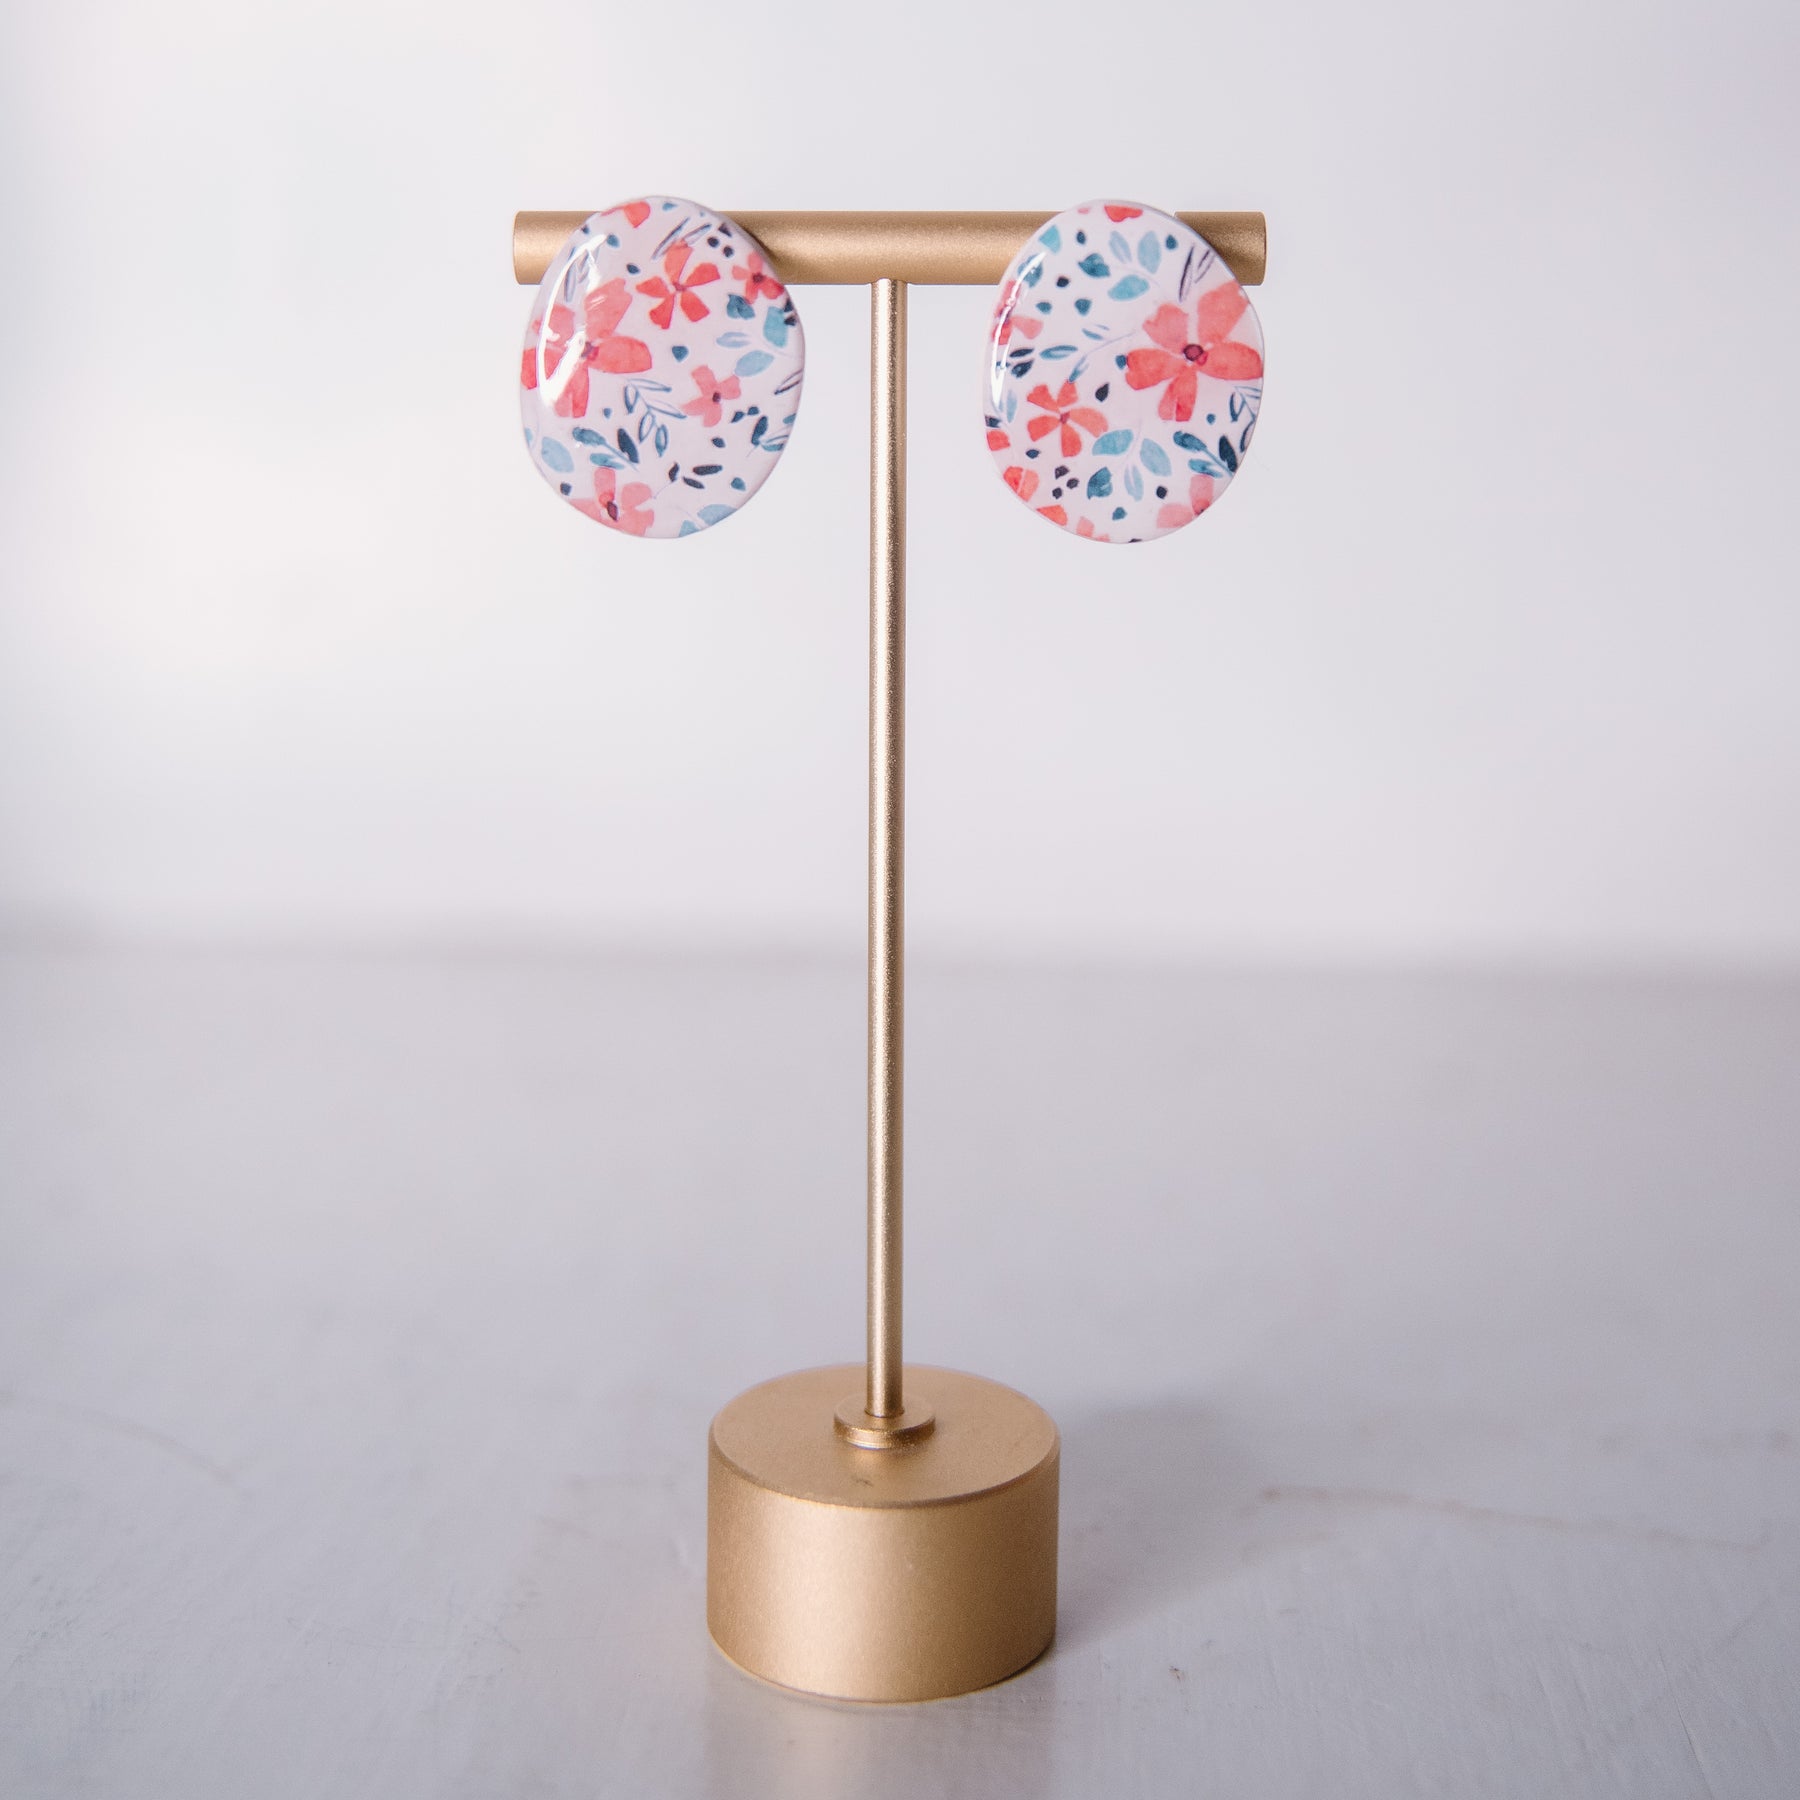 Playful Floral Chic Earring Collection